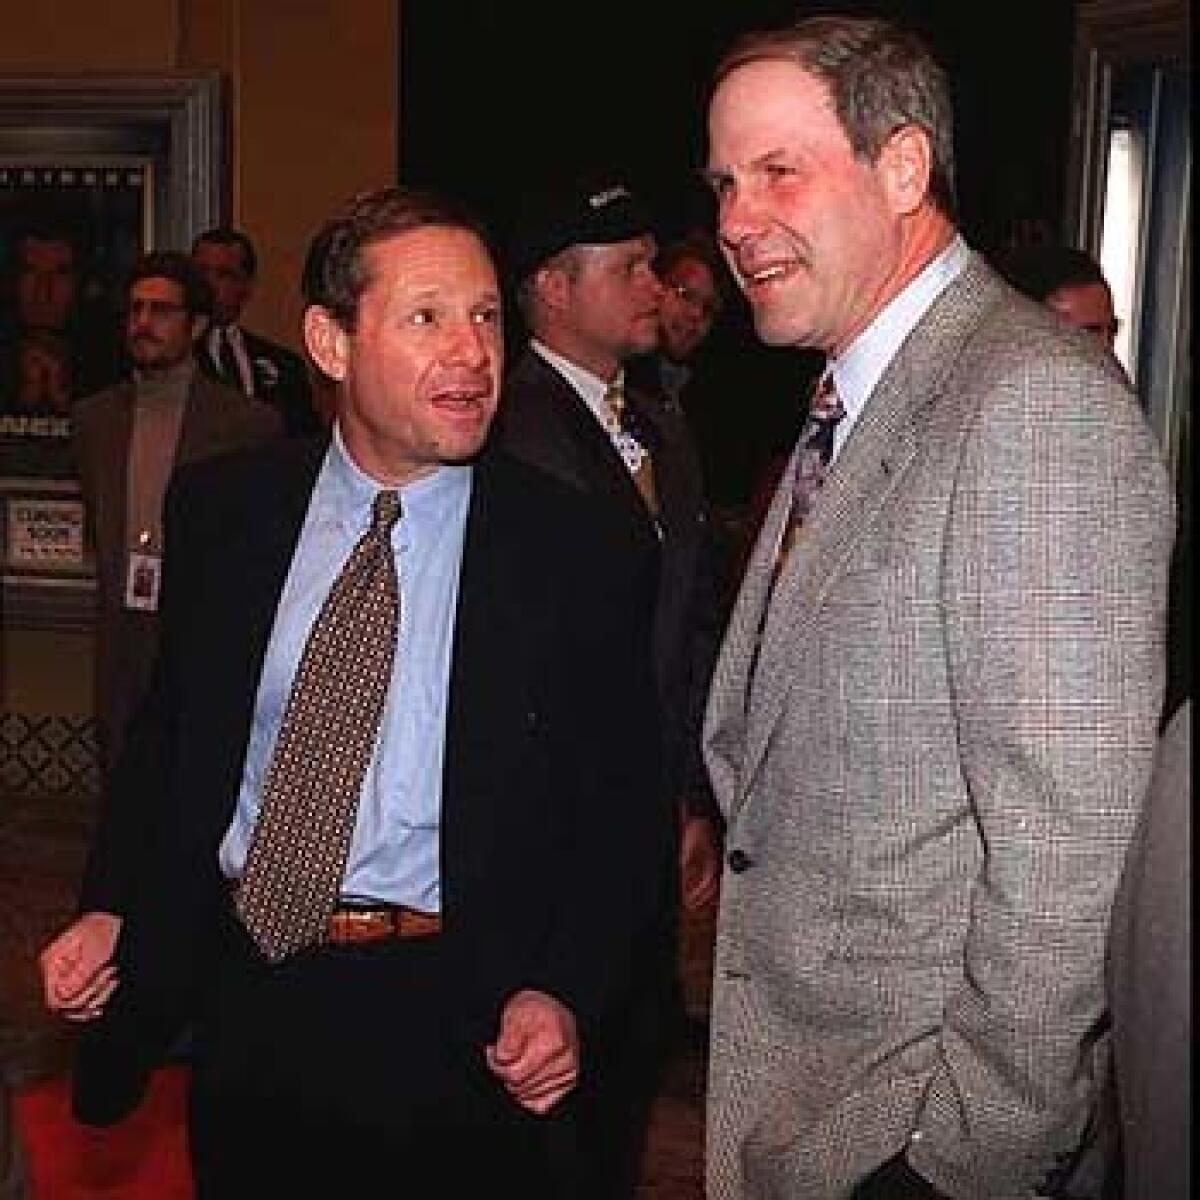 Michael Ovitz, left, with Disney chief Michael Eisner at a movie premiere in 1996 before Ovitz was pushed out as the companys second-in-command.